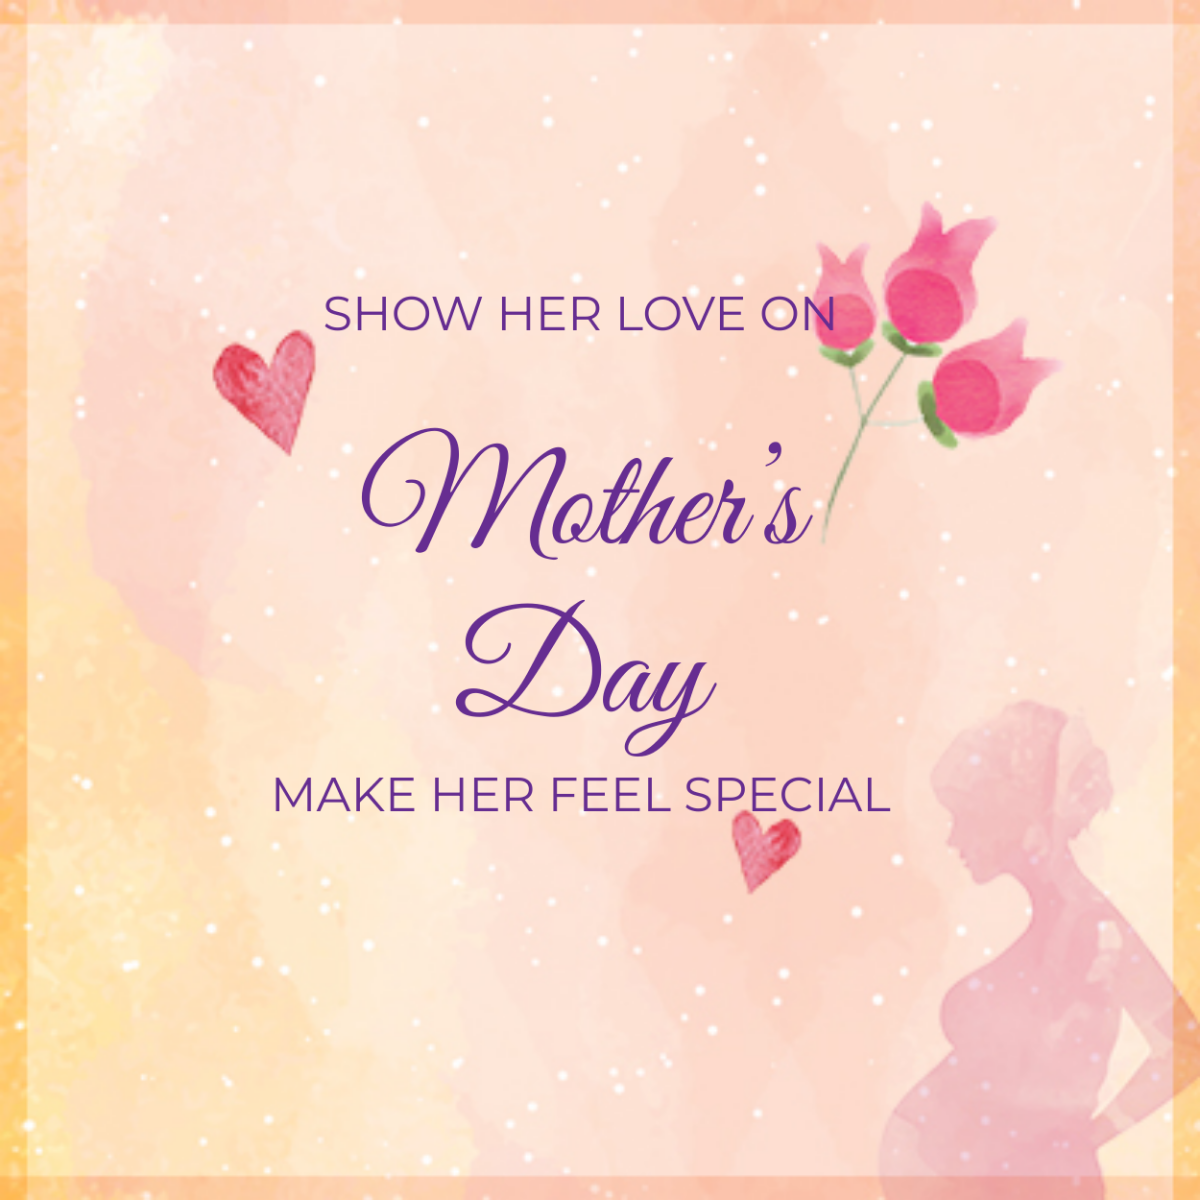 Mother's Day Google Plus Header Photo